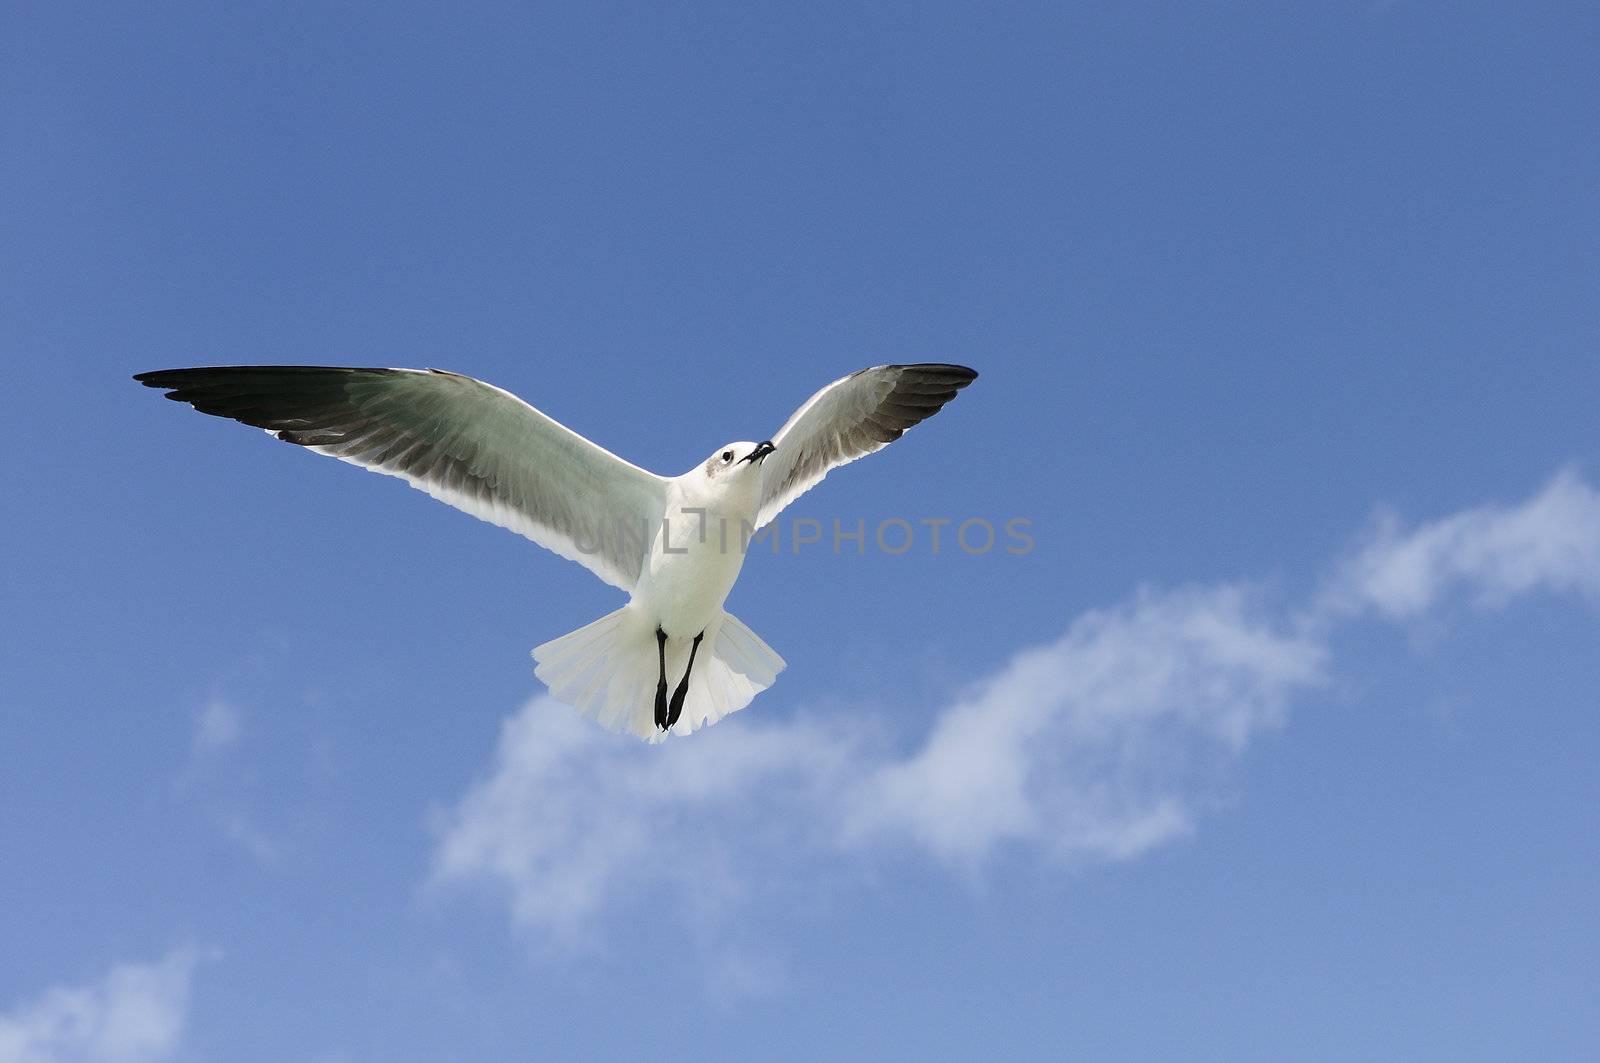 A beautiful seagull by ventdusud